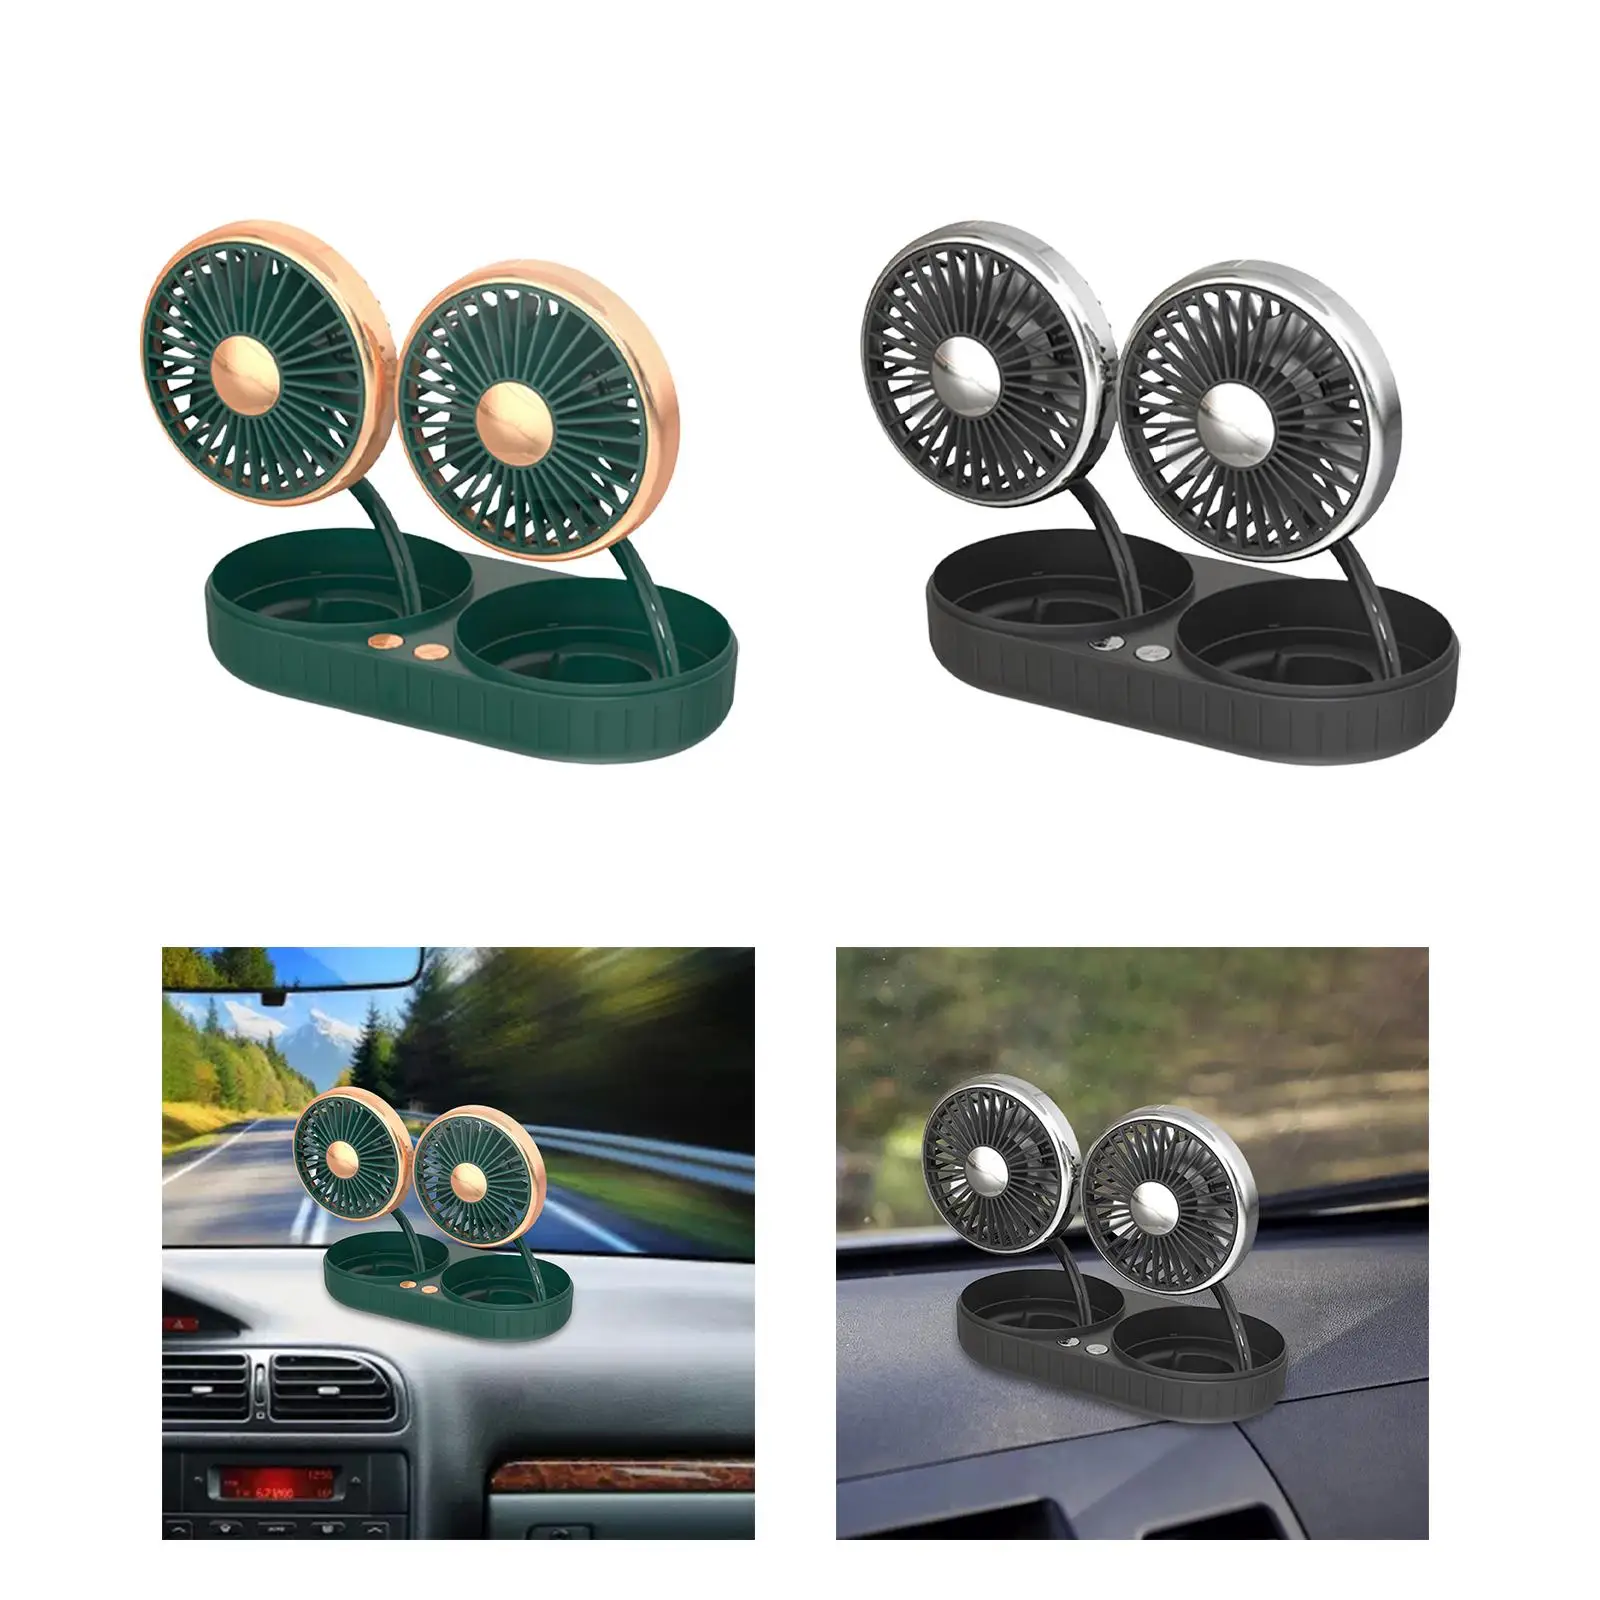 Vehicle Fans Dual Heads 360 Degree Rotation Automobile Strong Wind USB Rechargeable Supplies Car Fan for Vehicles SUV Truck